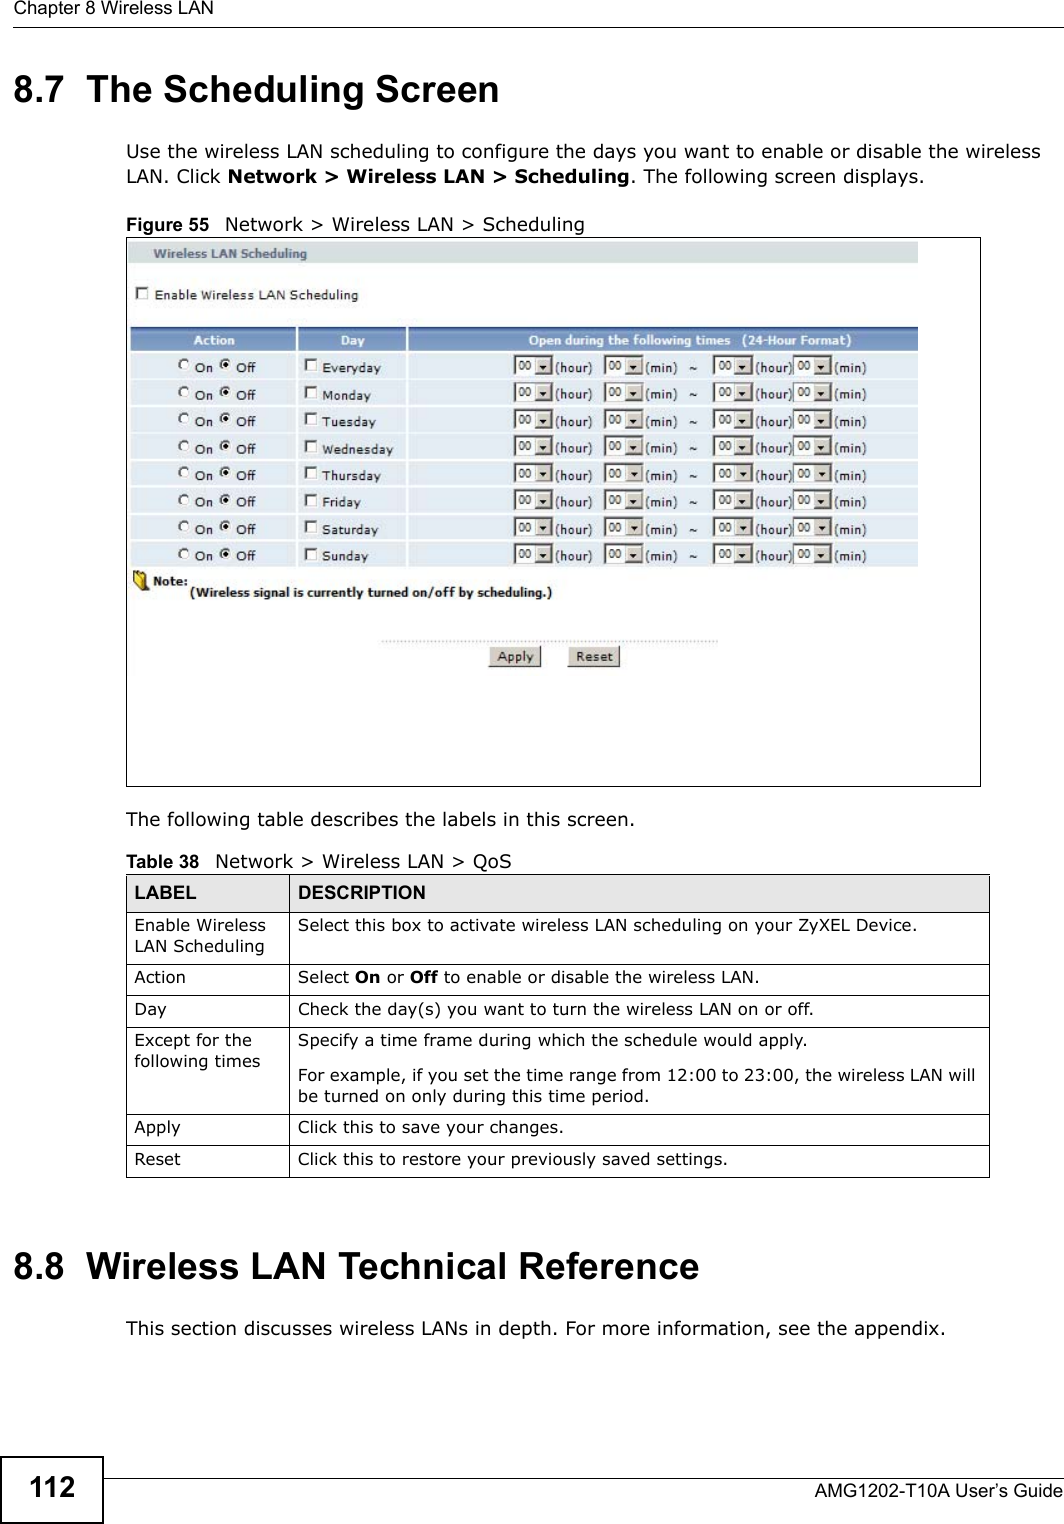 Chapter 8 Wireless LANAMG1202-T10A User’s Guide1128.7  The Scheduling ScreenUse the wireless LAN scheduling to configure the days you want to enable or disable the wireless LAN. Click Network &gt; Wireless LAN &gt; Scheduling. The following screen displays.Figure 55   Network &gt; Wireless LAN &gt; SchedulingThe following table describes the labels in this screen.8.8  Wireless LAN Technical ReferenceThis section discusses wireless LANs in depth. For more information, see the appendix.Table 38   Network &gt; Wireless LAN &gt; QoSLABEL DESCRIPTIONEnable Wireless LAN SchedulingSelect this box to activate wireless LAN scheduling on your ZyXEL Device.Action Select On or Off to enable or disable the wireless LAN.Day Check the day(s) you want to turn the wireless LAN on or off.Except for the following timesSpecify a time frame during which the schedule would apply.For example, if you set the time range from 12:00 to 23:00, the wireless LAN will be turned on only during this time period.Apply Click this to save your changes.Reset Click this to restore your previously saved settings.